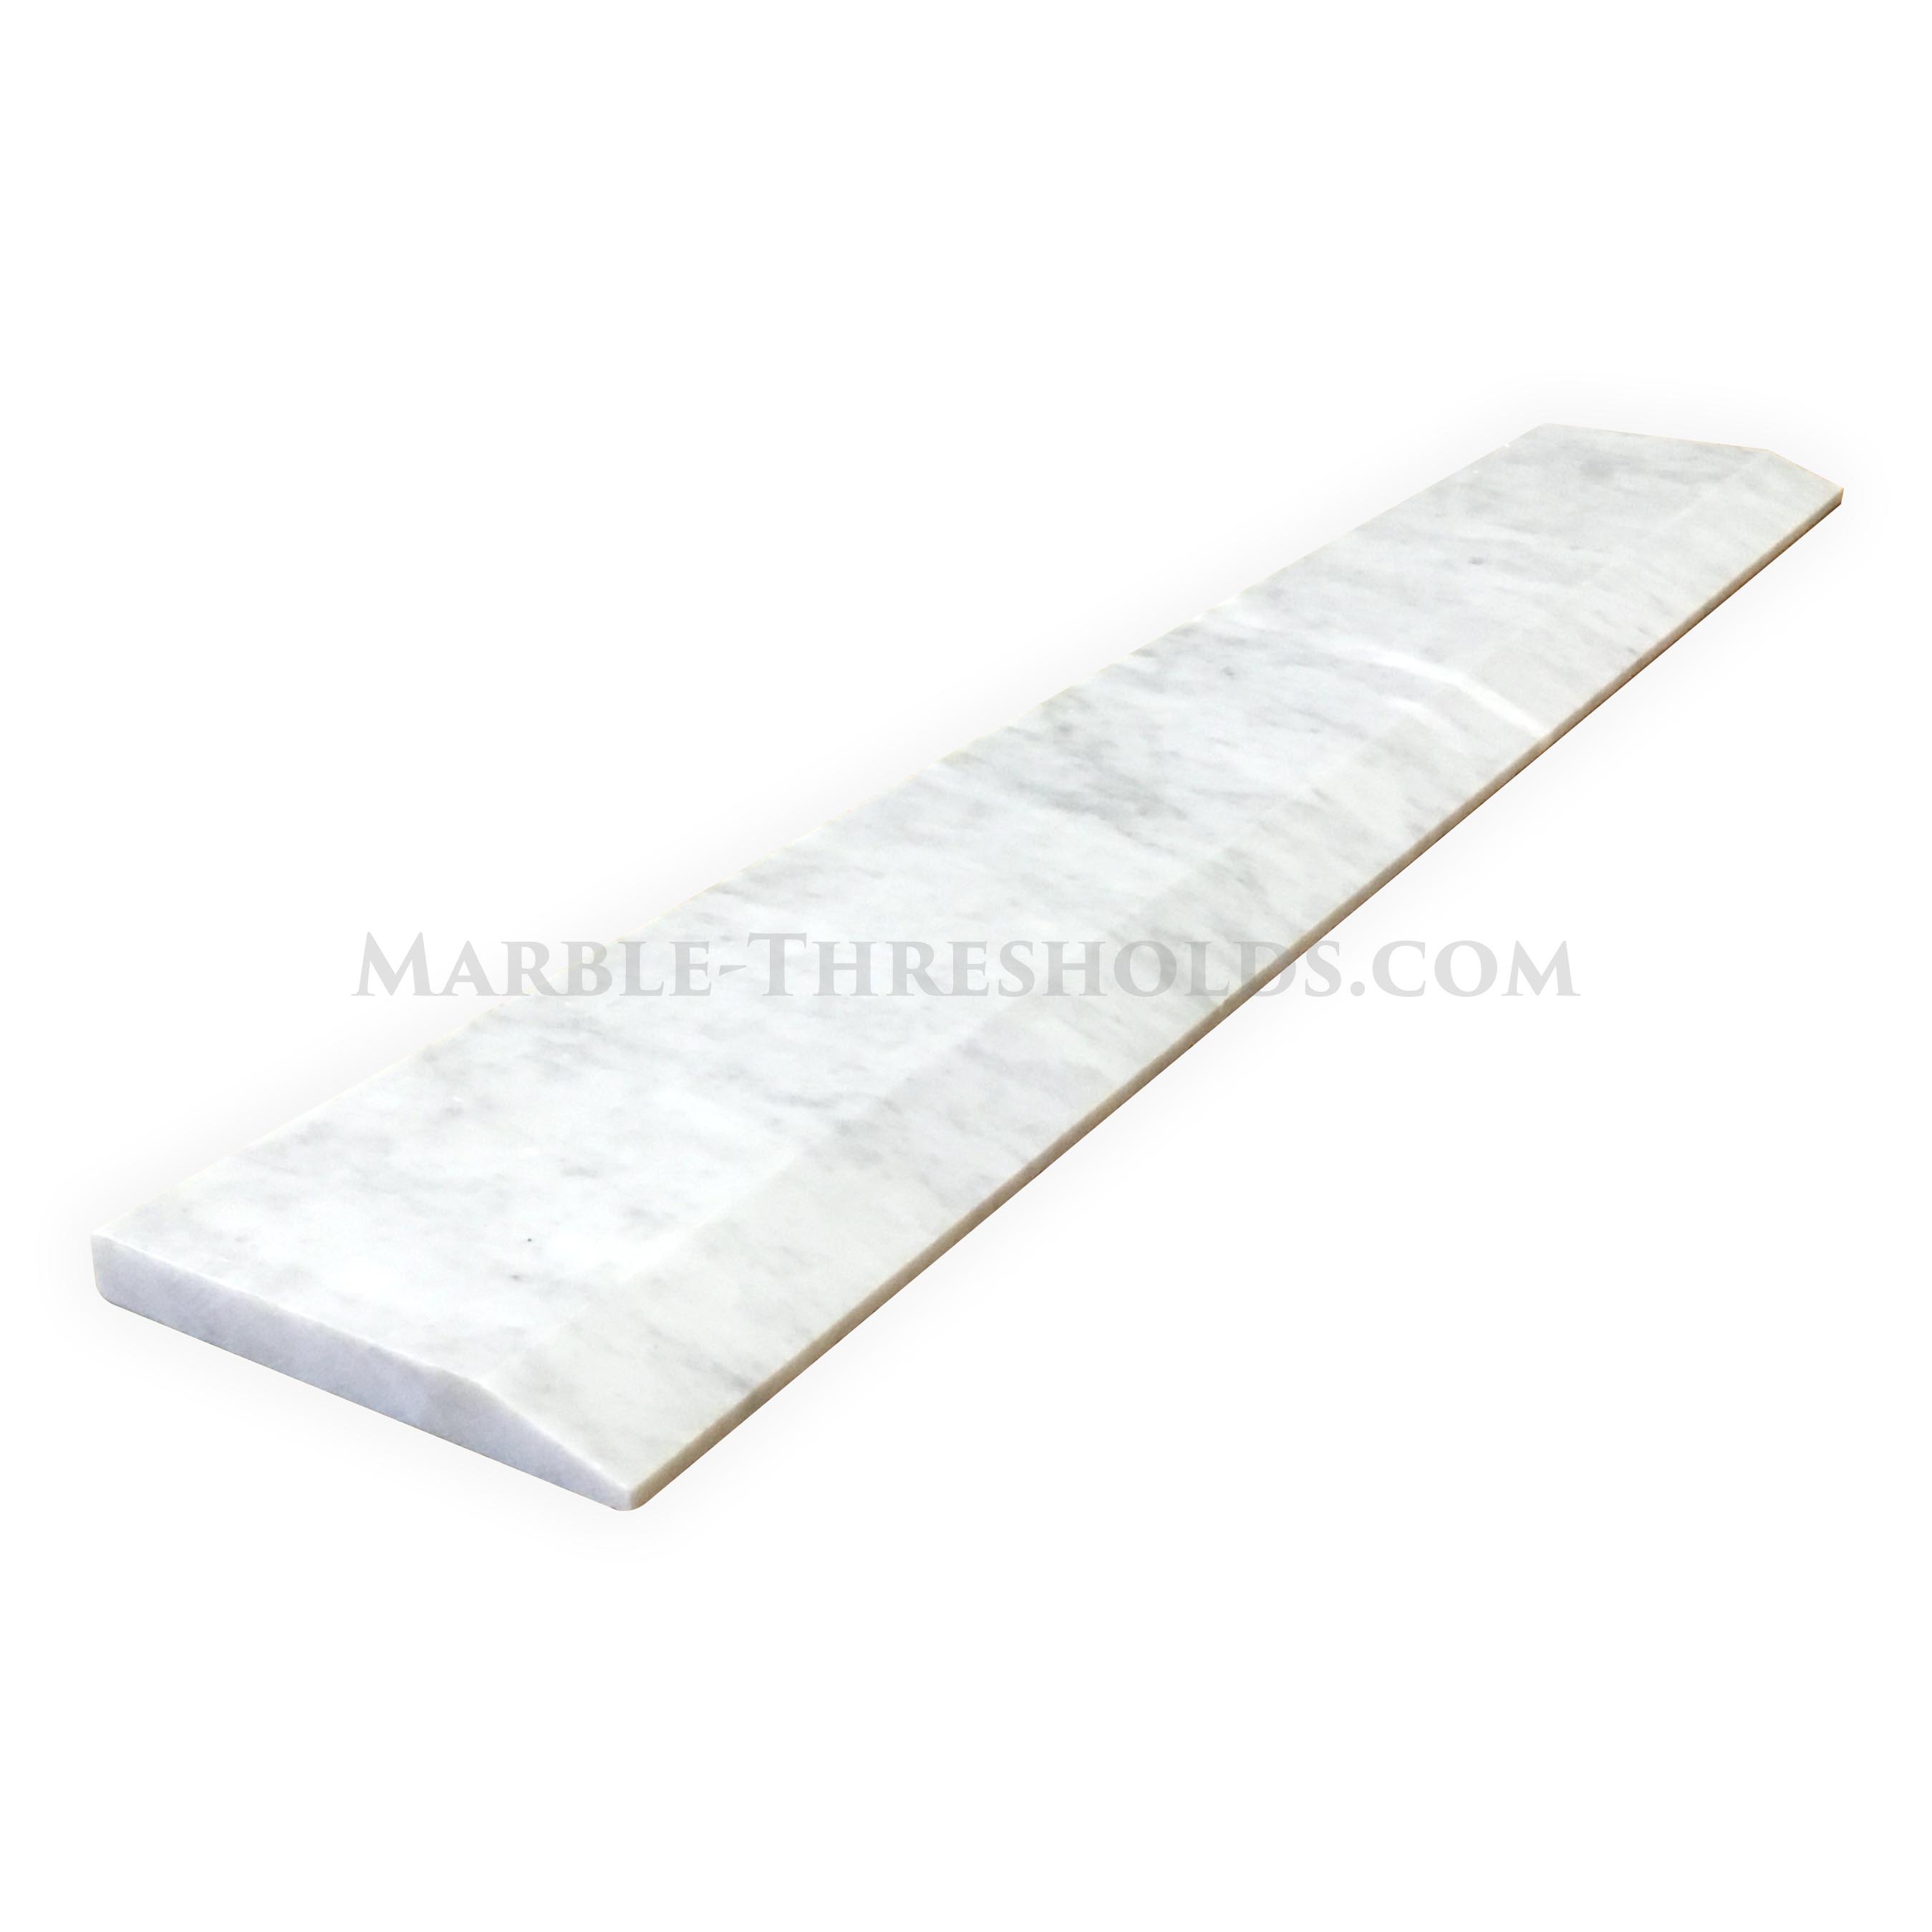 Single Hollywood Door Threshold White Carrara Marble 36 X 4 Inches Marble Thresholds Com